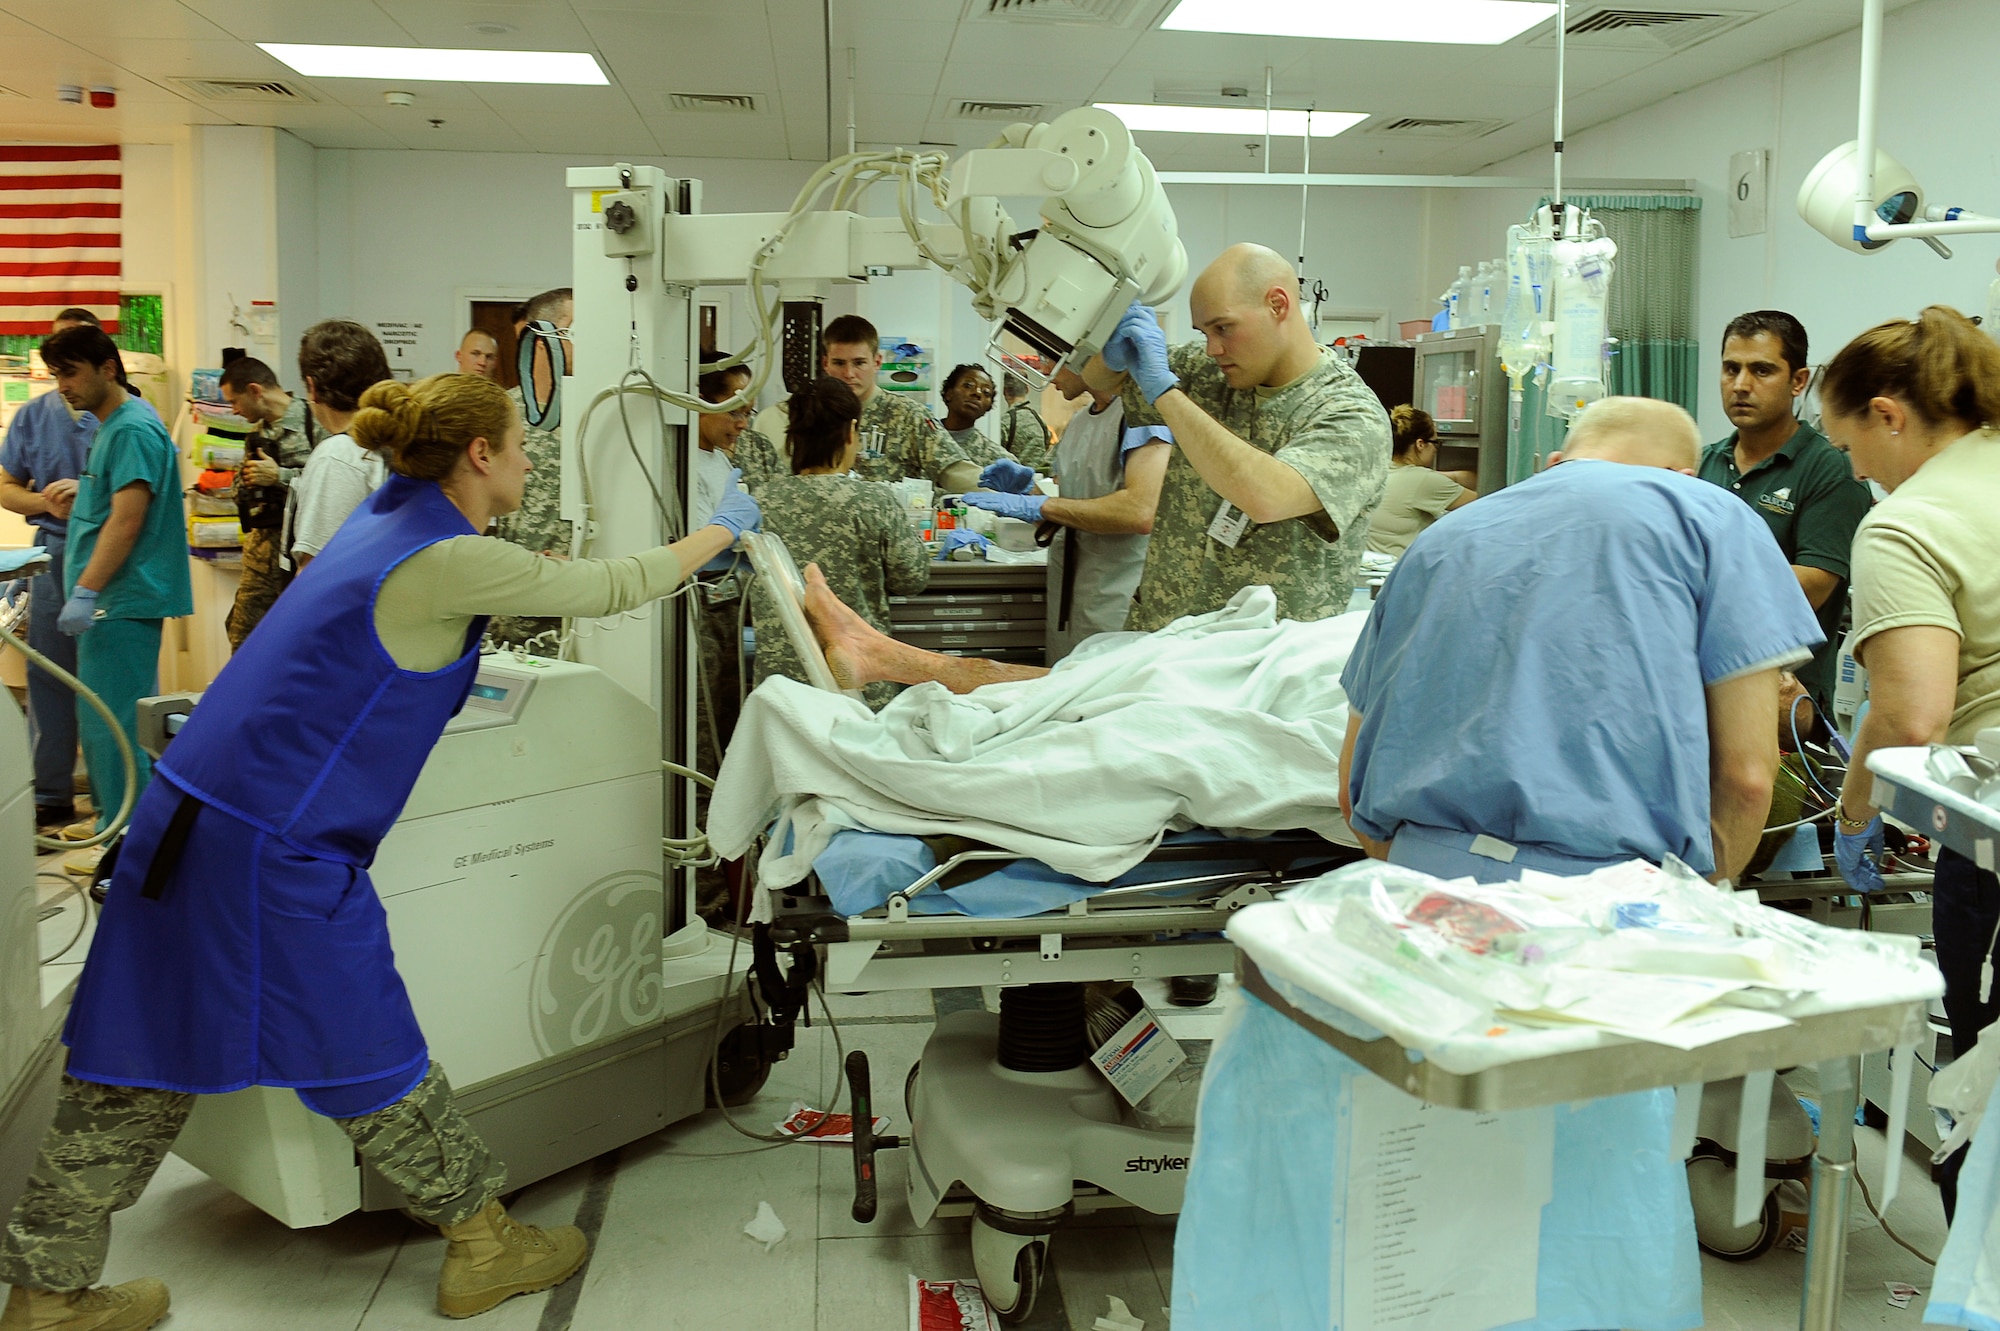 Airmen from the 455th Expeditionary Medical Group work in the emergency room to save avalanche victims who were medically evacuated Feb. 9, 2010, to Craig Joint Theater Hospital at Bagram Airfield, Afghanistan. Dozens of Afghans were taken to Bagram Airfield after avalanches struck a mountain pass in the Parwan Province. (U.S. Air Force photo by/Tech. Sgt. Jeromy K. Cross)